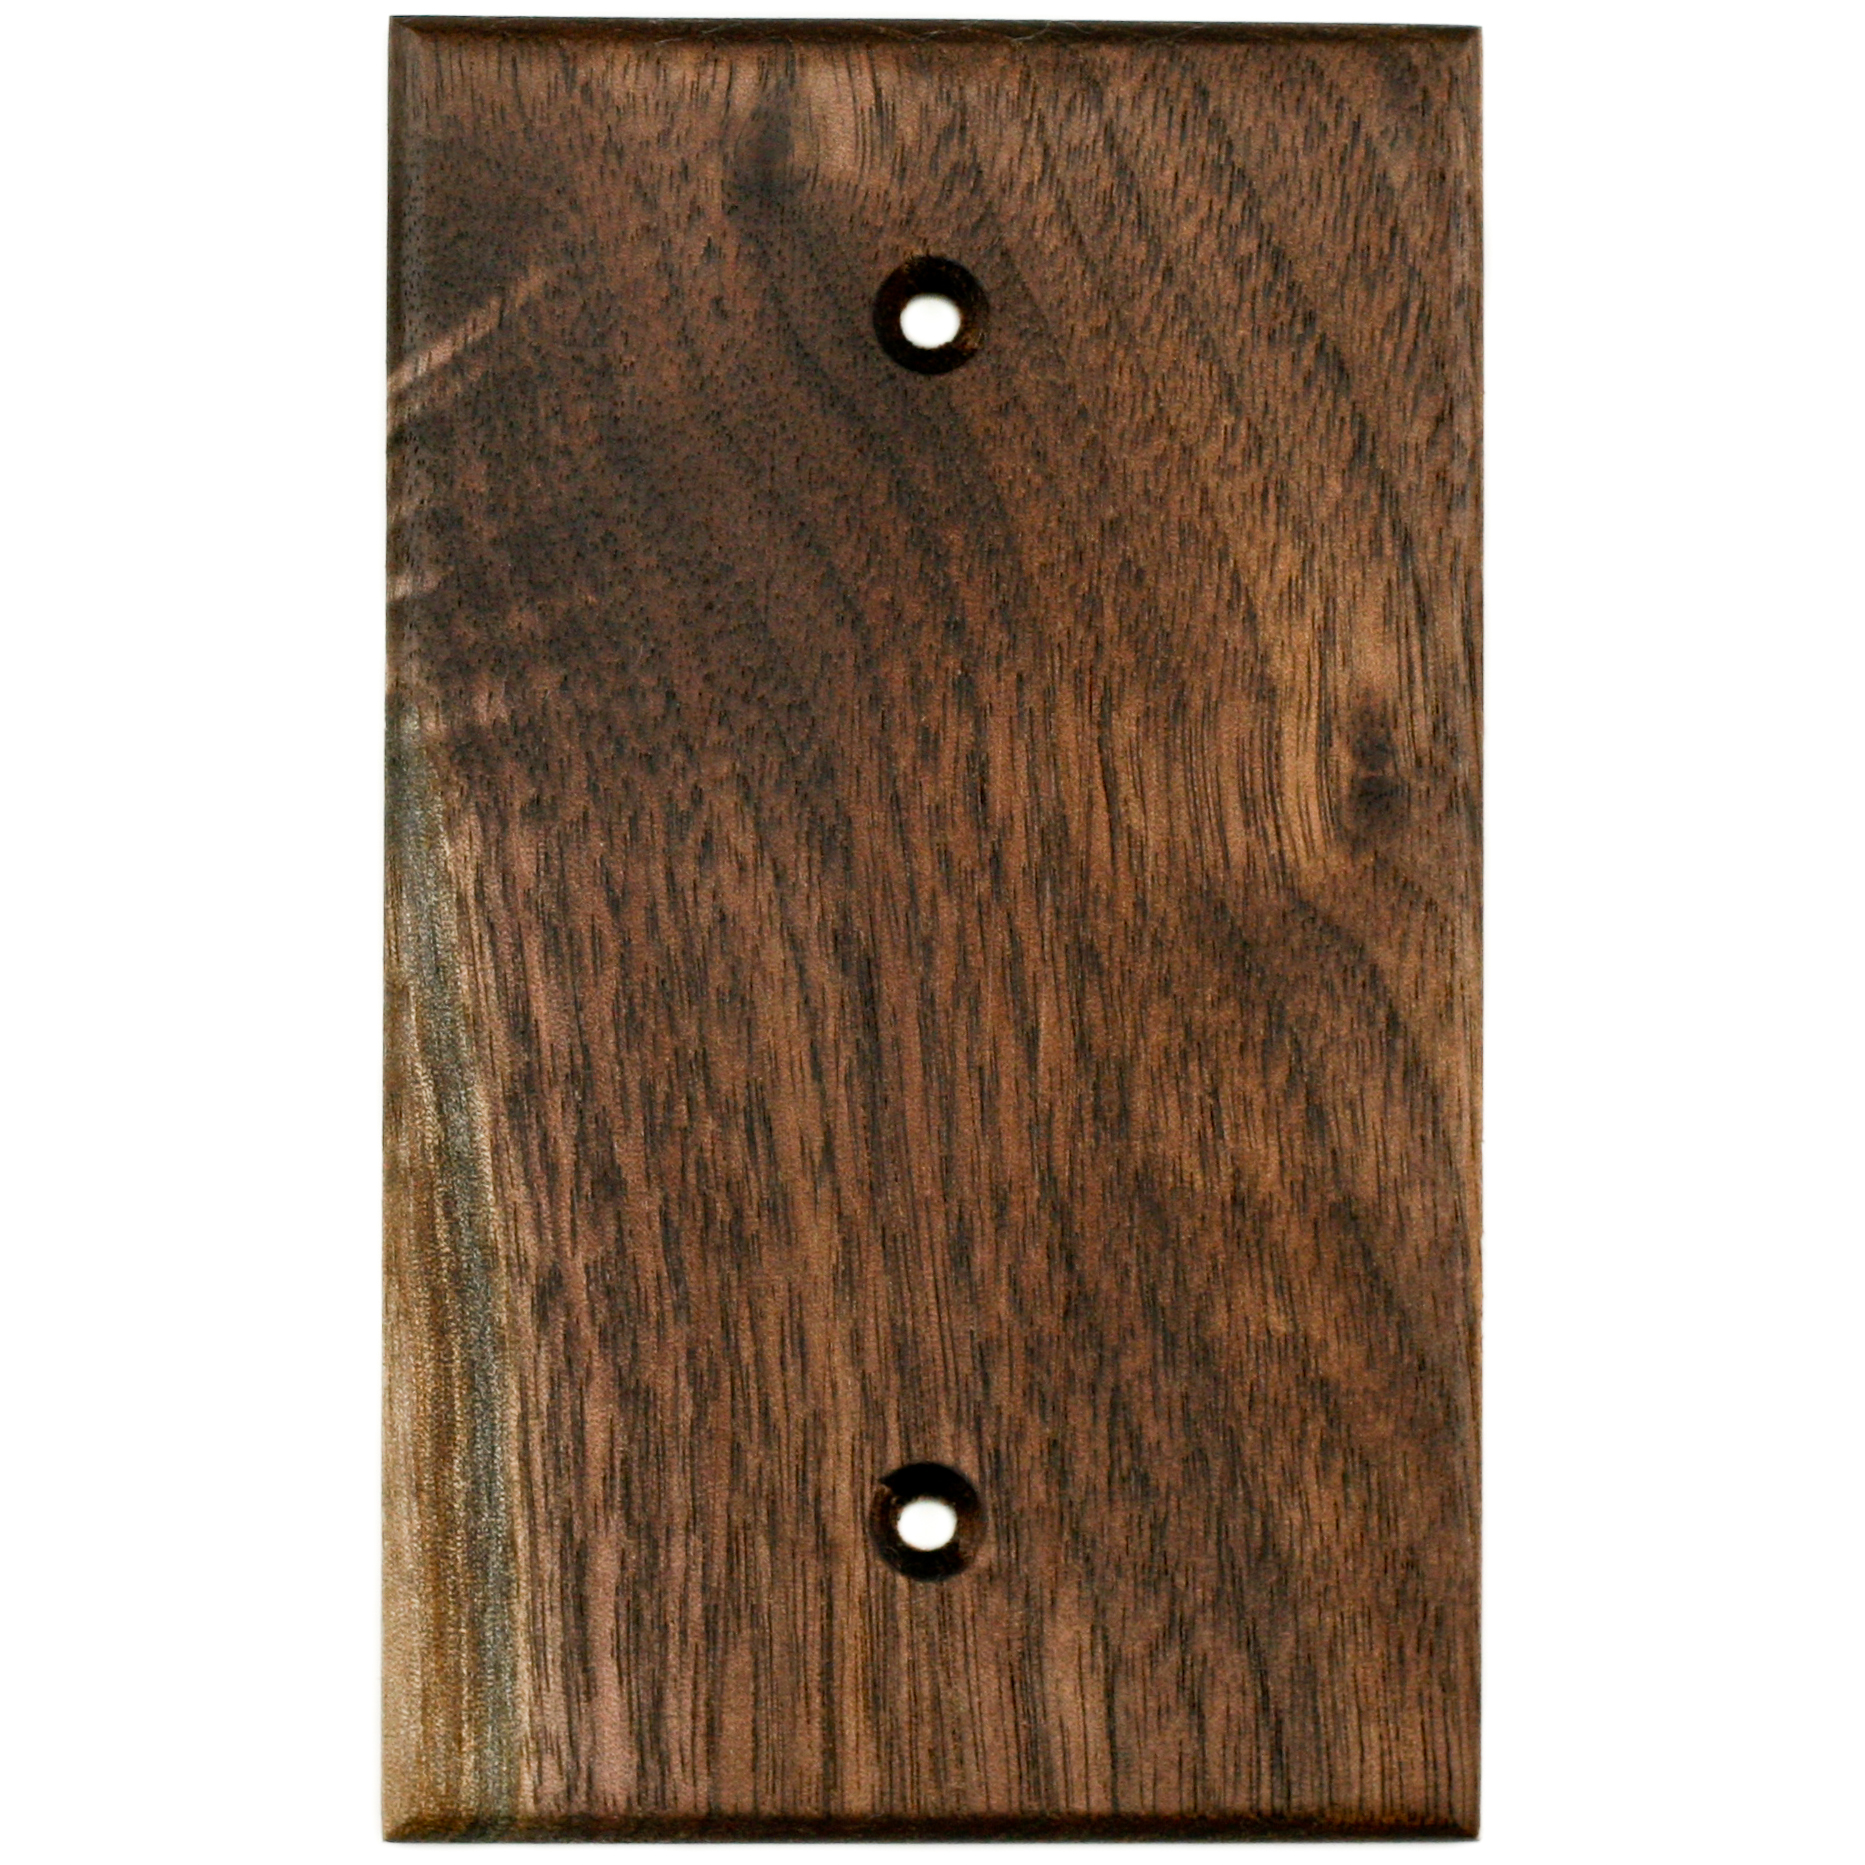 RICH WALNUT WOOD GRAIN TEXTURE LIGHT SWITCH OUTLET WALL PLATES HOME OFFICE DECOR 